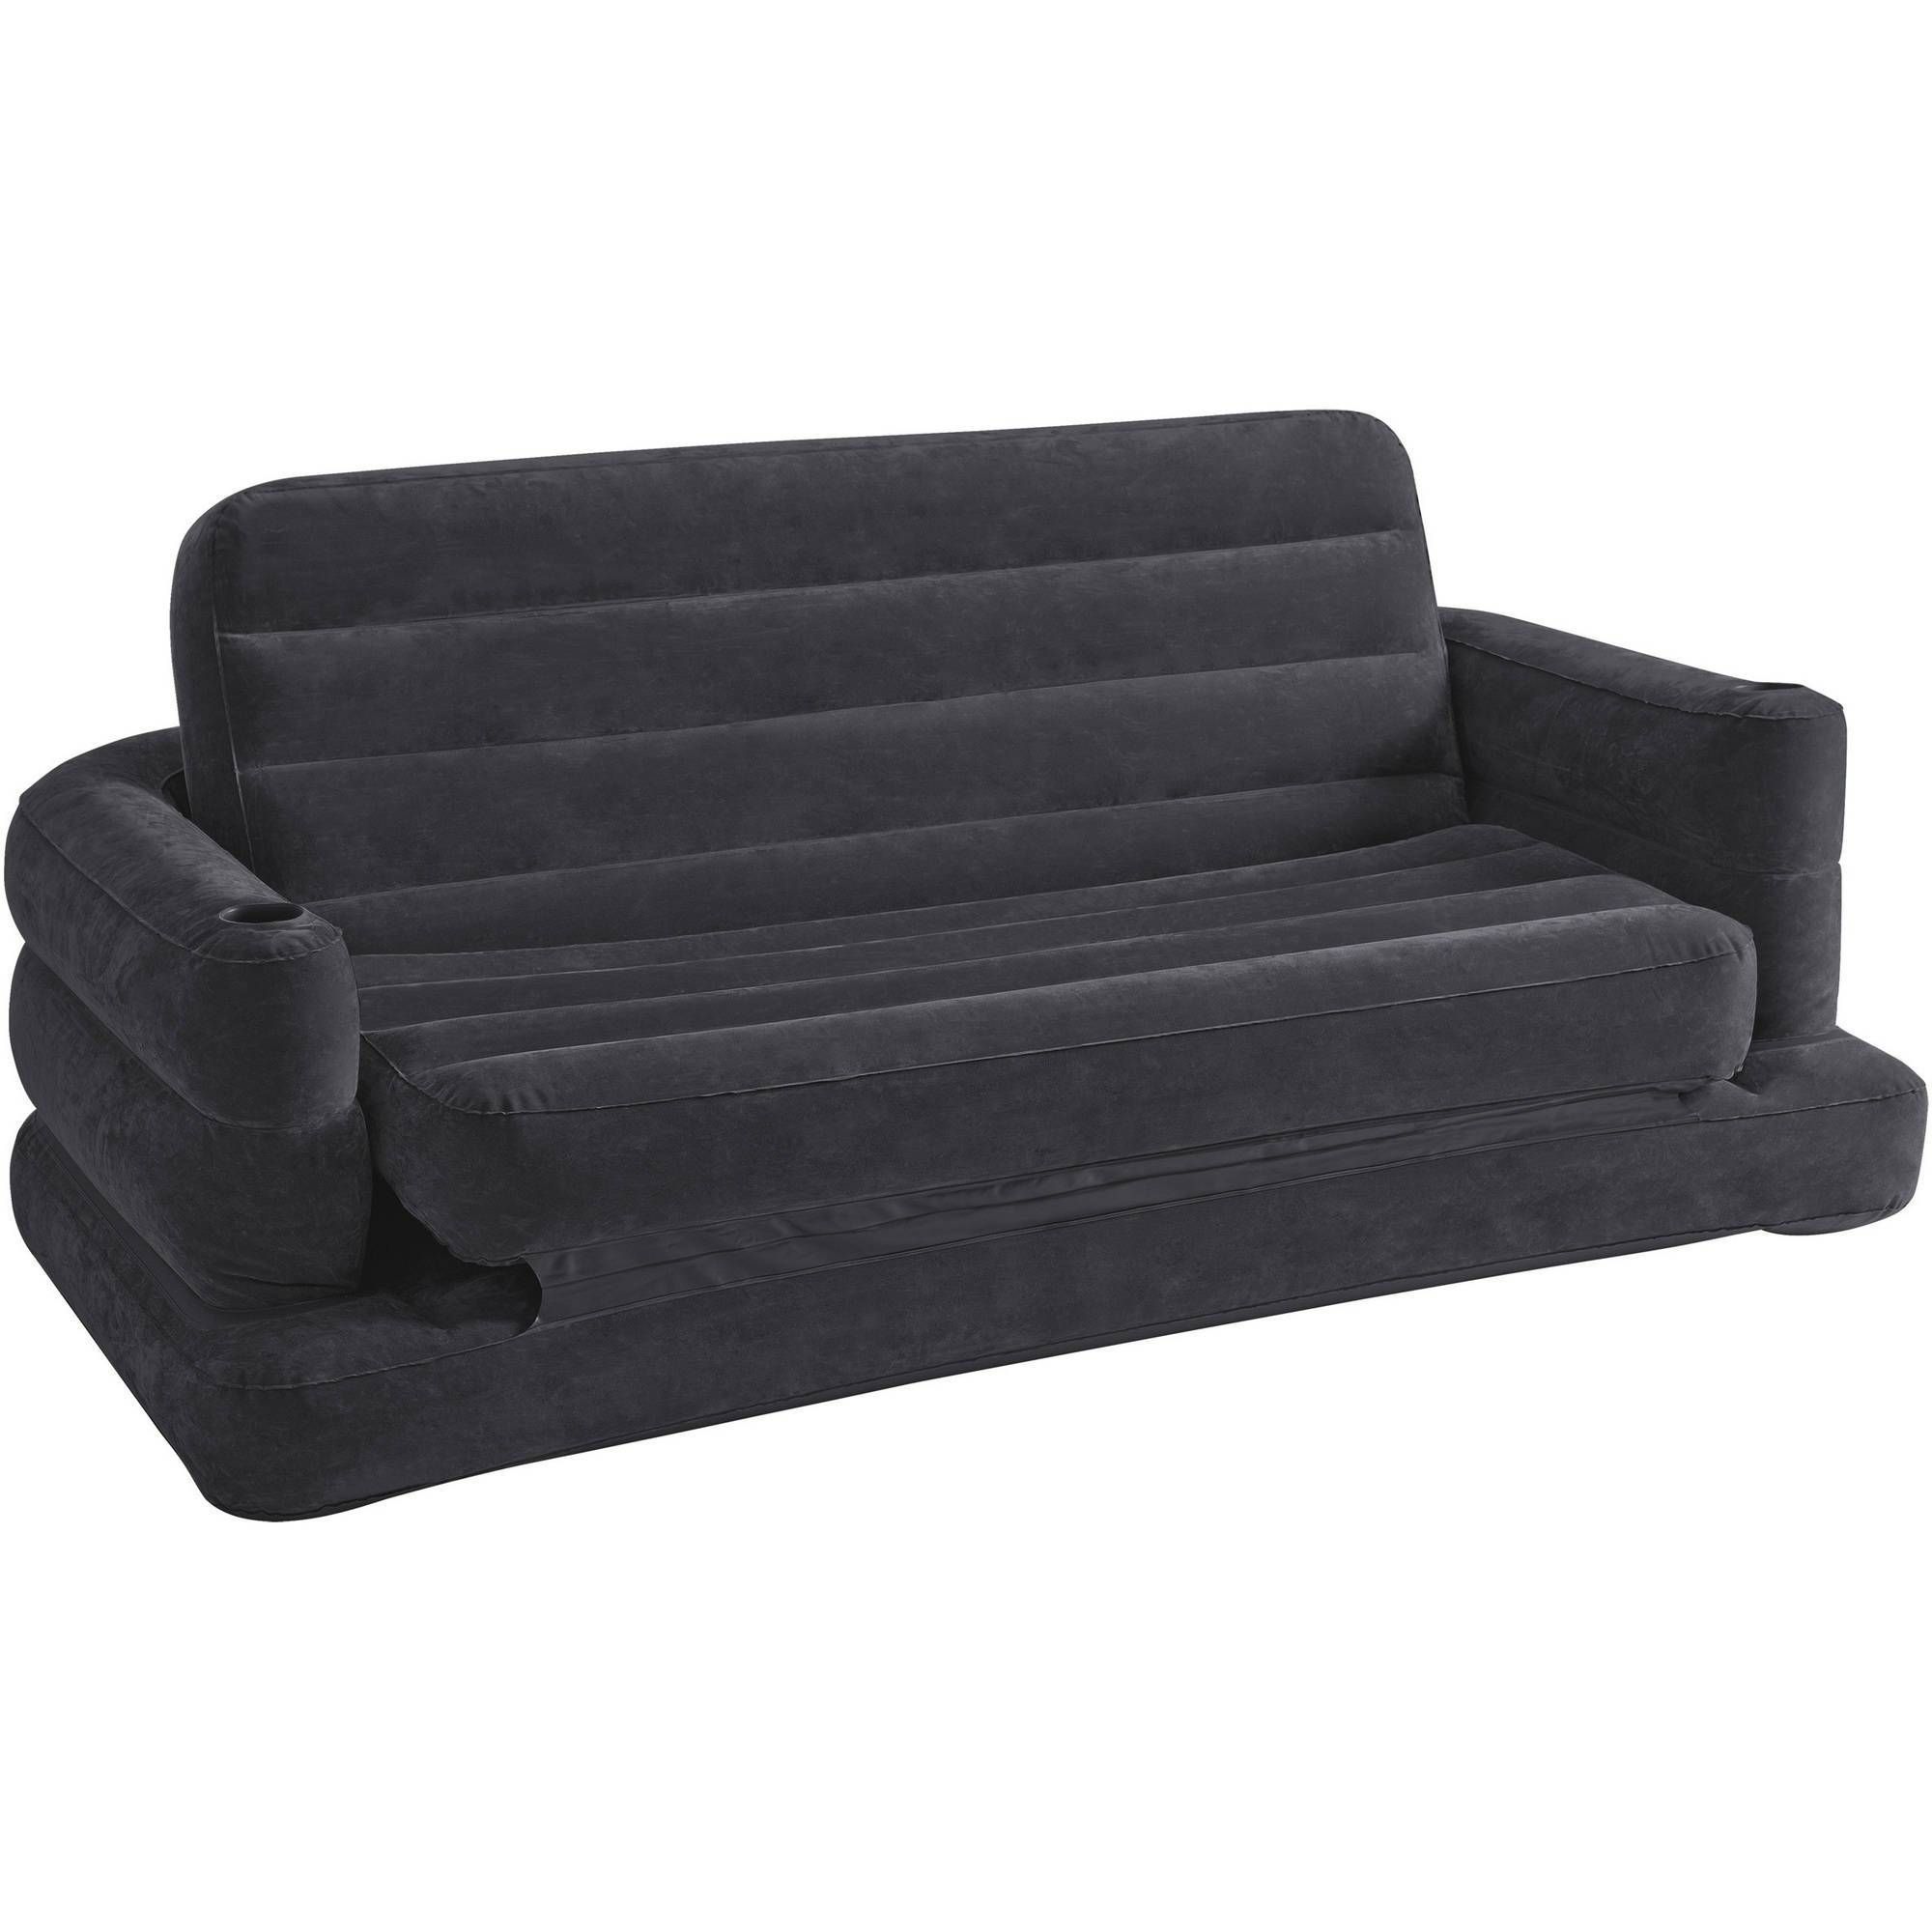 Intex Inflatable Pull Out Sofa 15 With Intex Inflatable Pull Out In Intex Inflatable Pull Out Sofas (Photo 14 of 15)